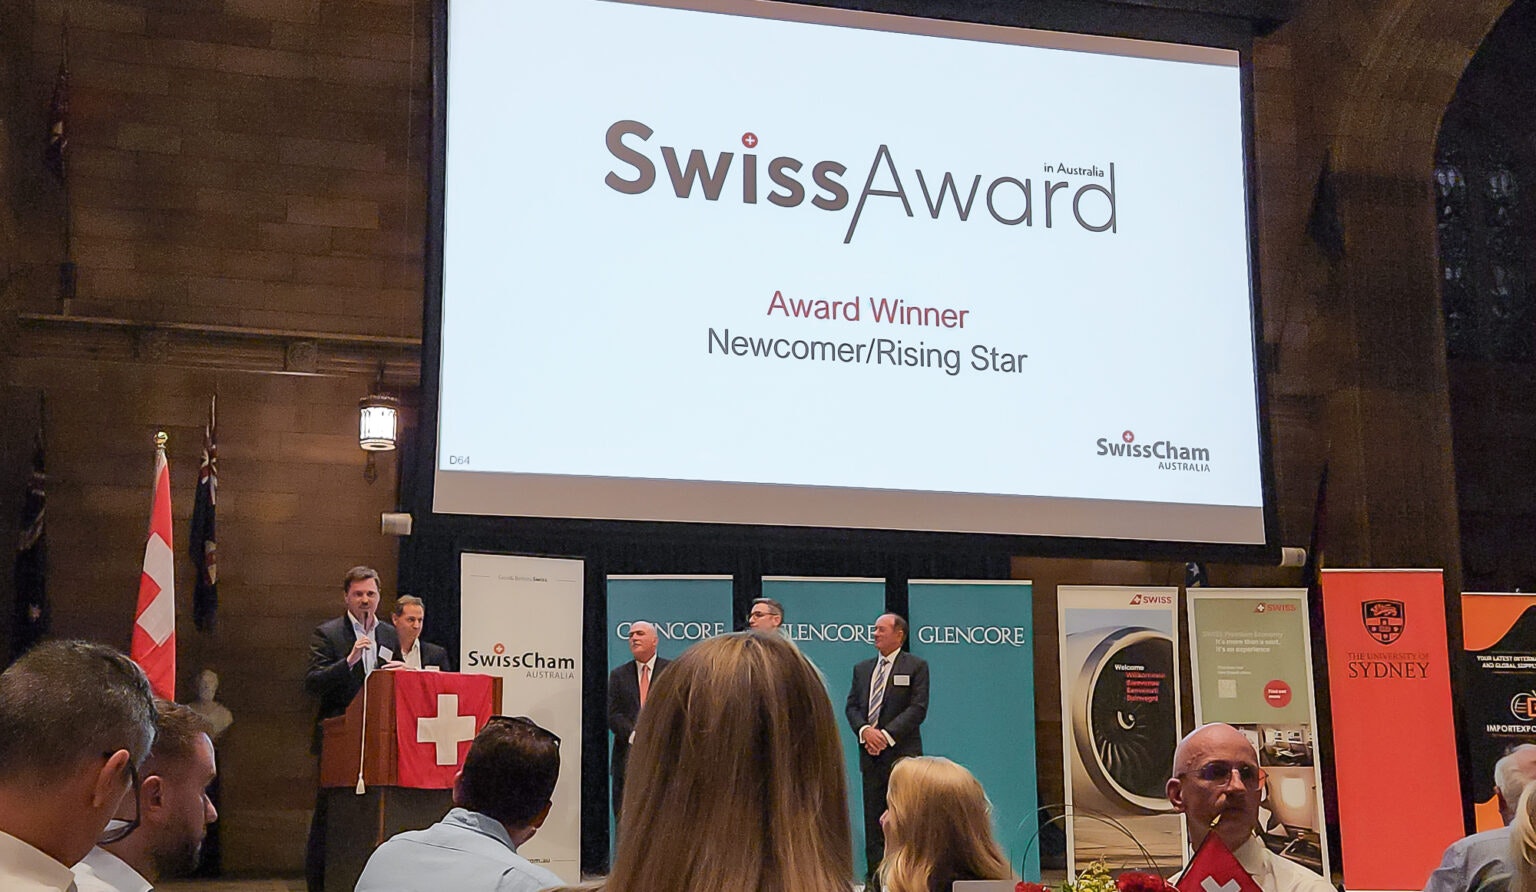 Presentation situation at the Swiss Award